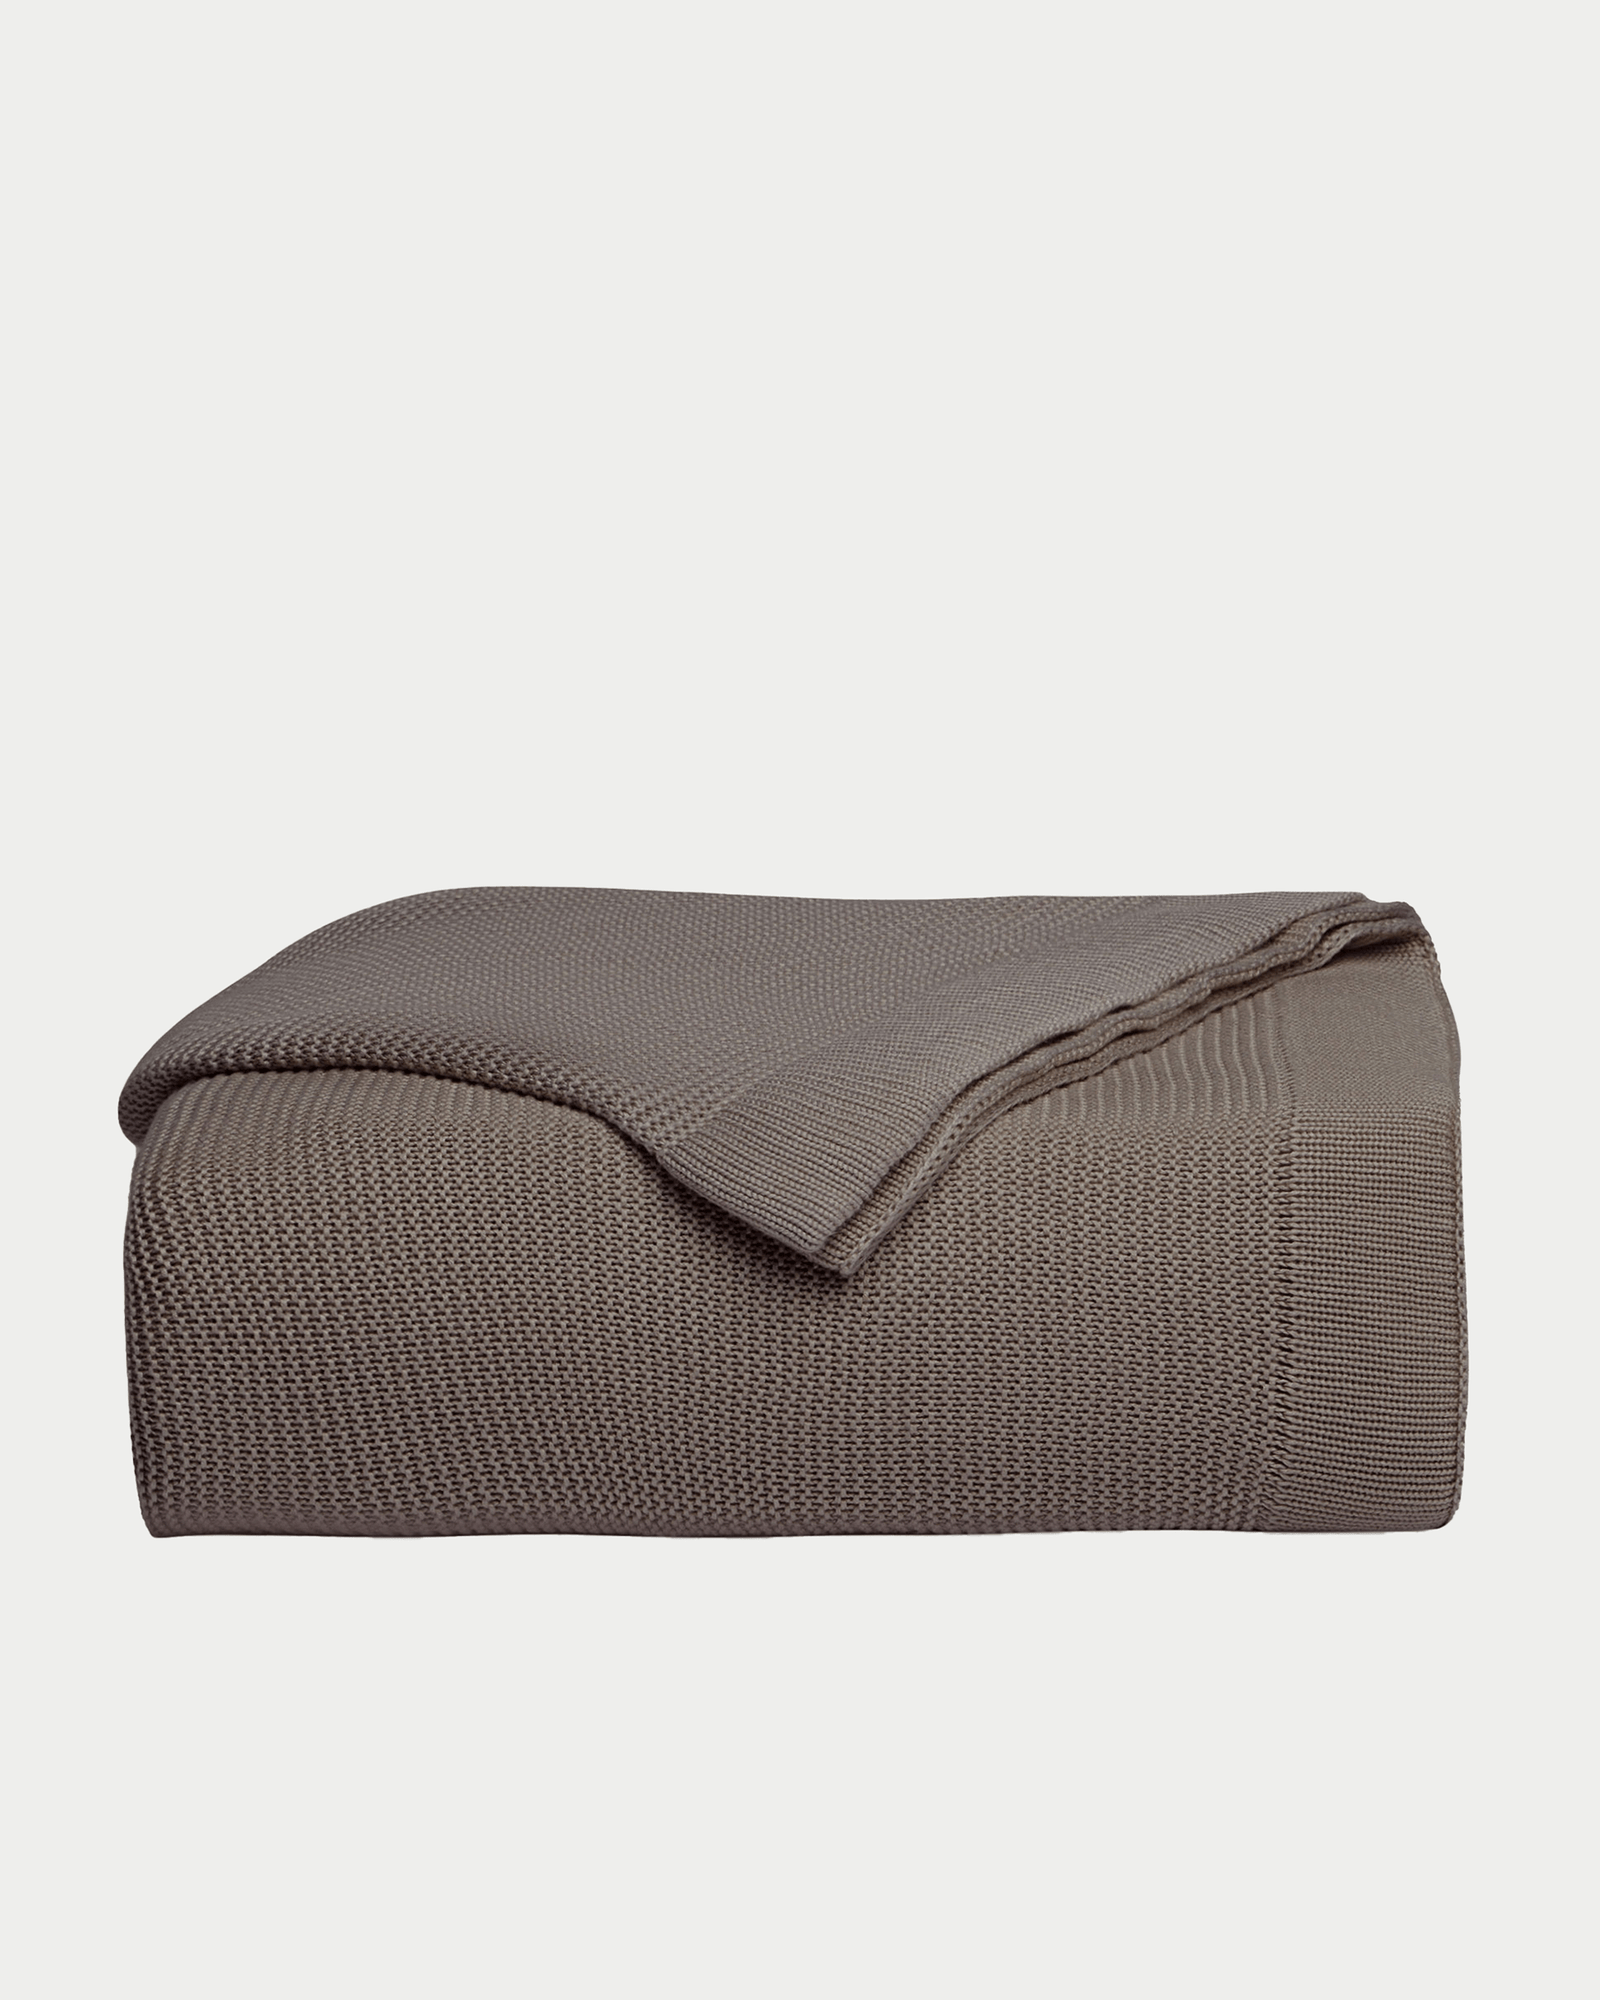 Charcoal cloud knit blanket folded with white background 